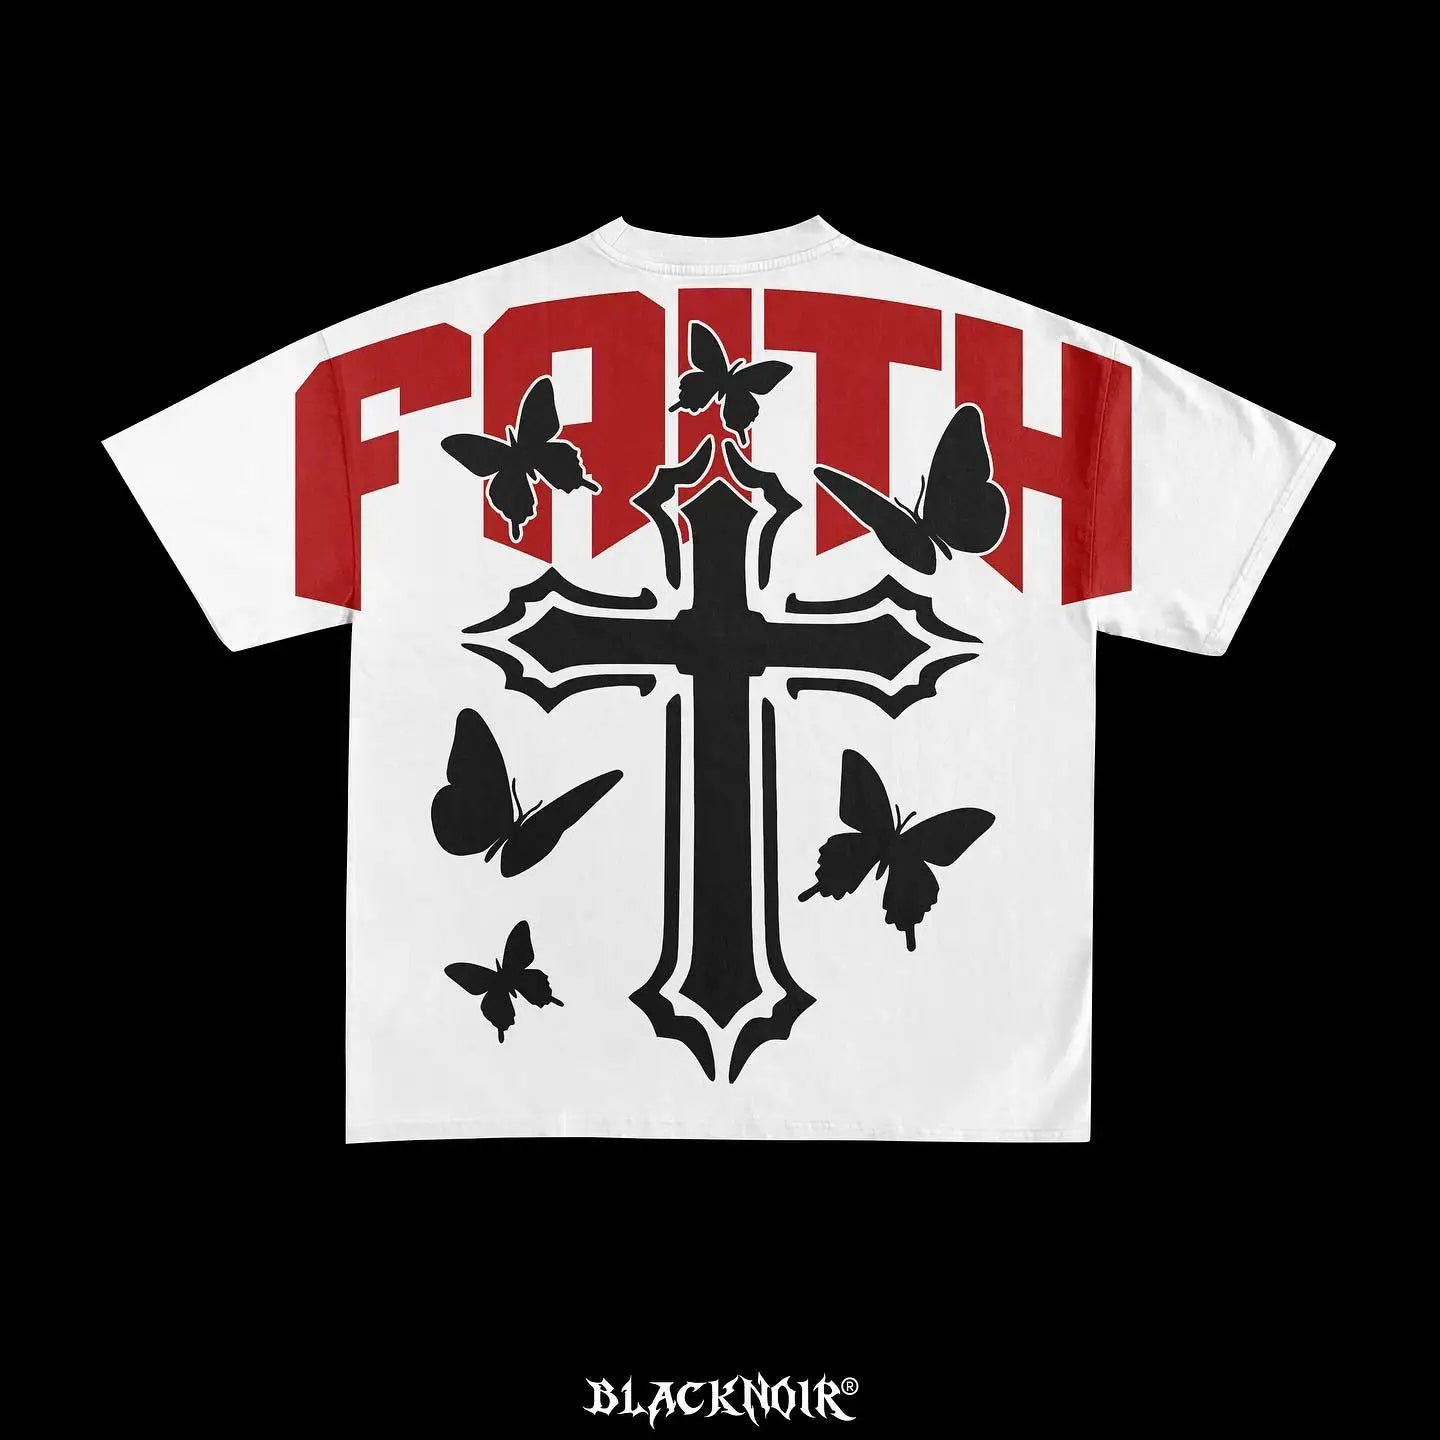 White oversized T-shirt made from high-quality cotton with bold red text "FAITH" on the back. A black cross surrounded by black butterflies is printed below the text. Brand name "Maramalive™" is displayed at the bottom, perfect for Cross butterfly Print graphic t shirts 2023 American y2k tops high quality cotton oversized t shirt goth women clothing.